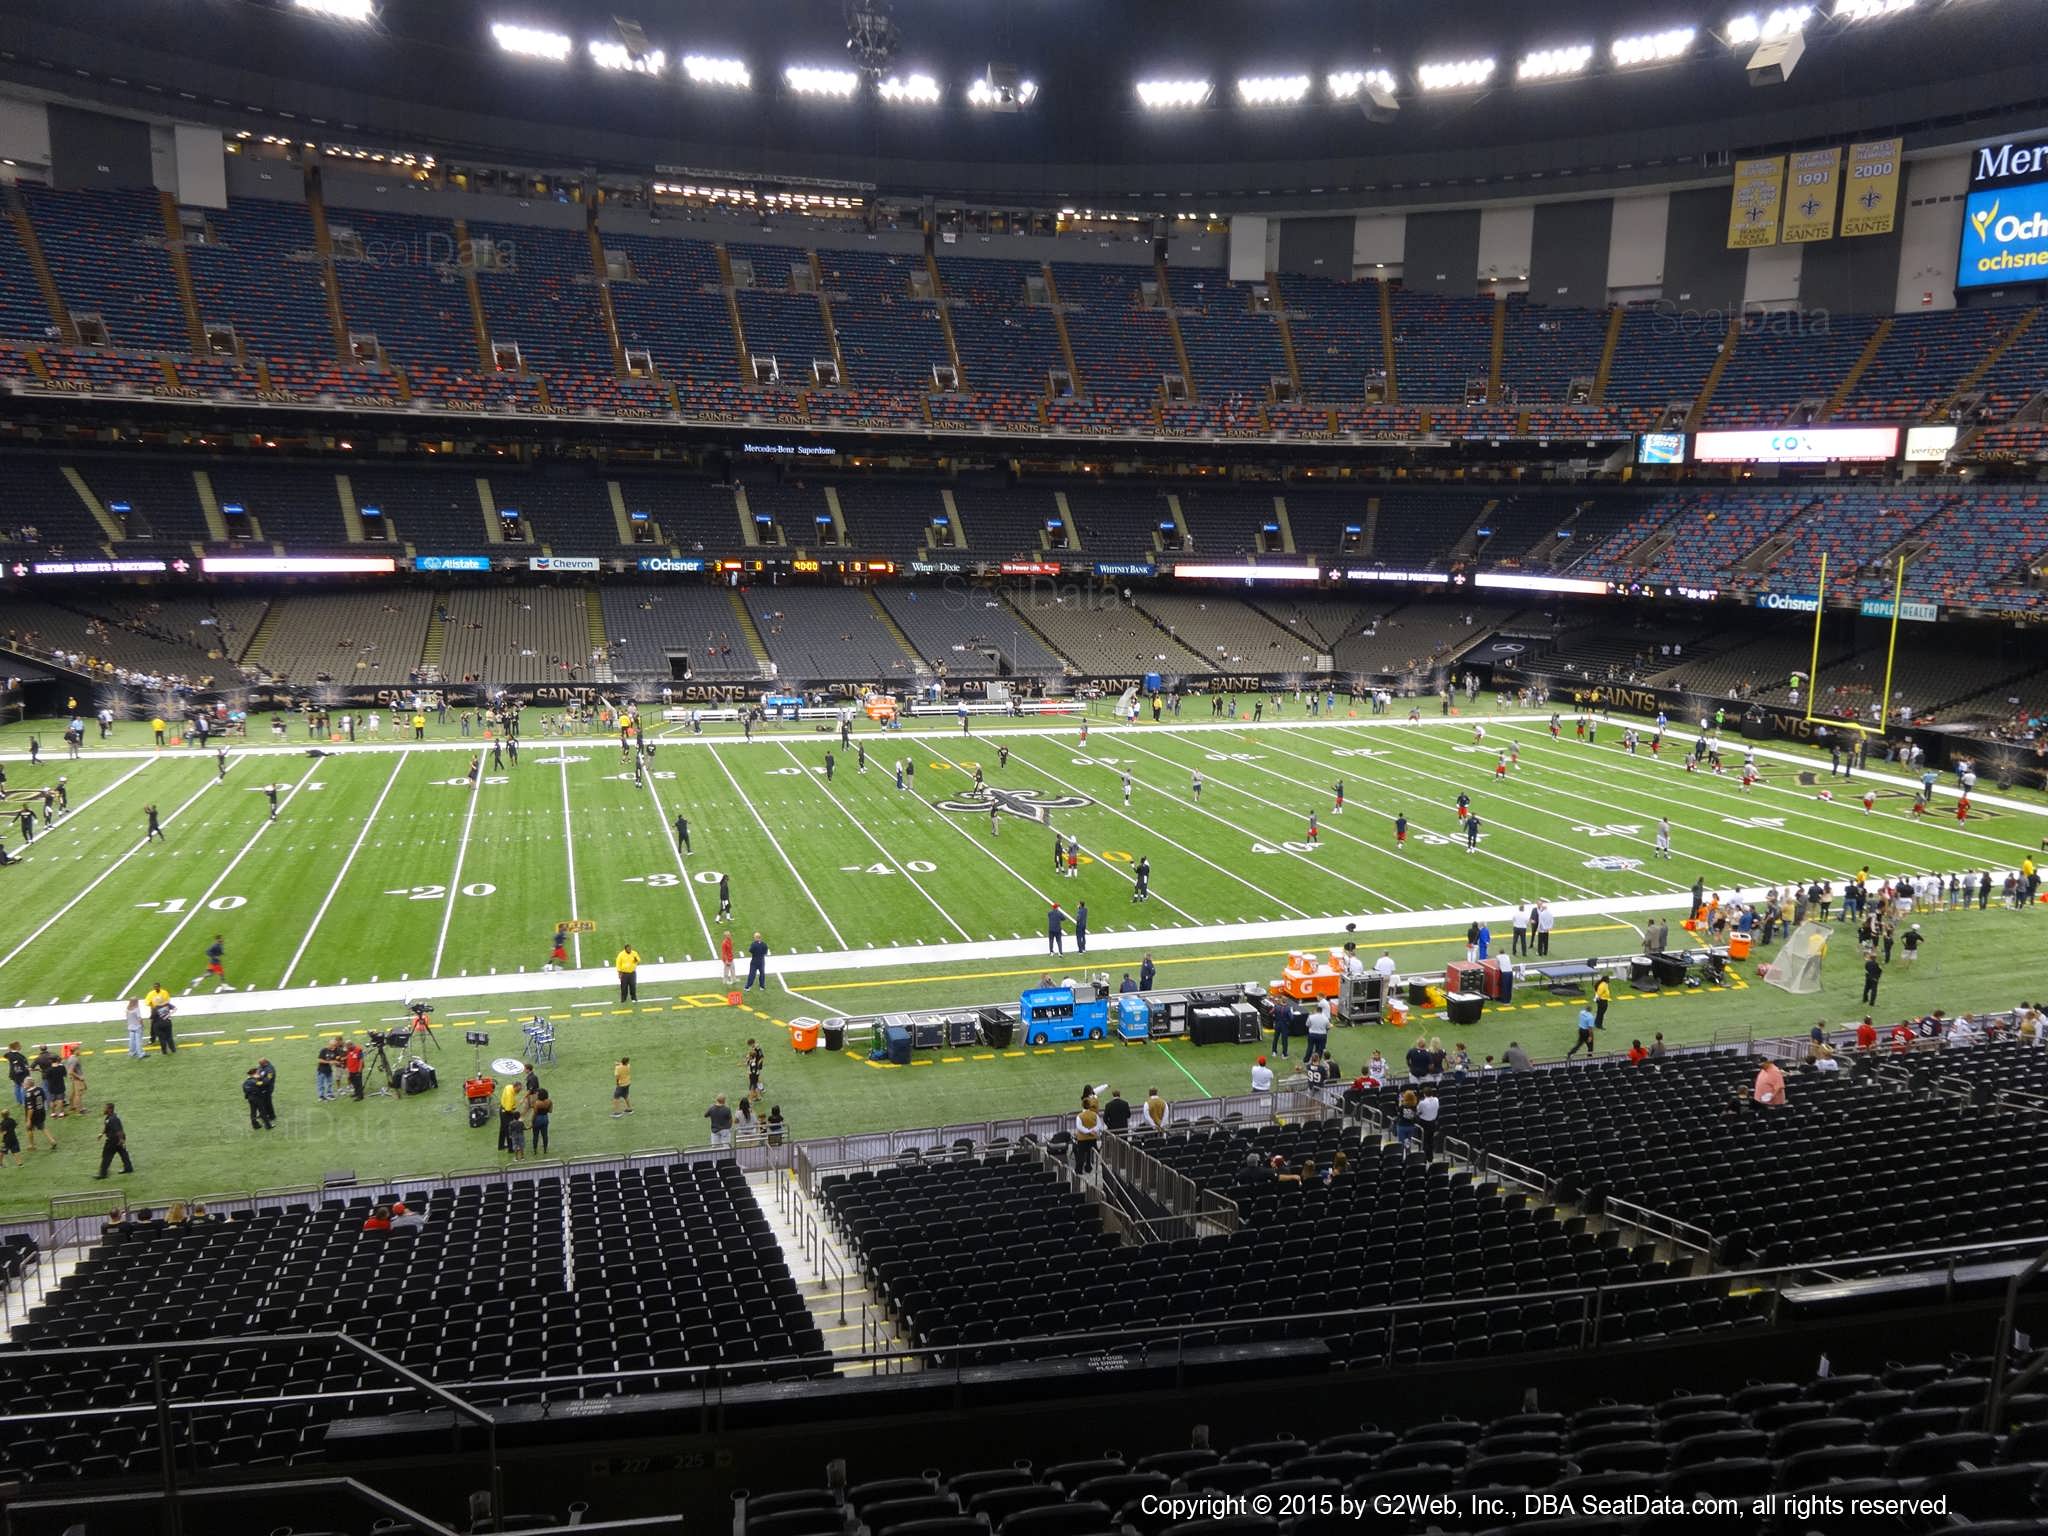 Seat view from section 314 at the Mercedes-Benz Superdome, home of the New Orleans Saints